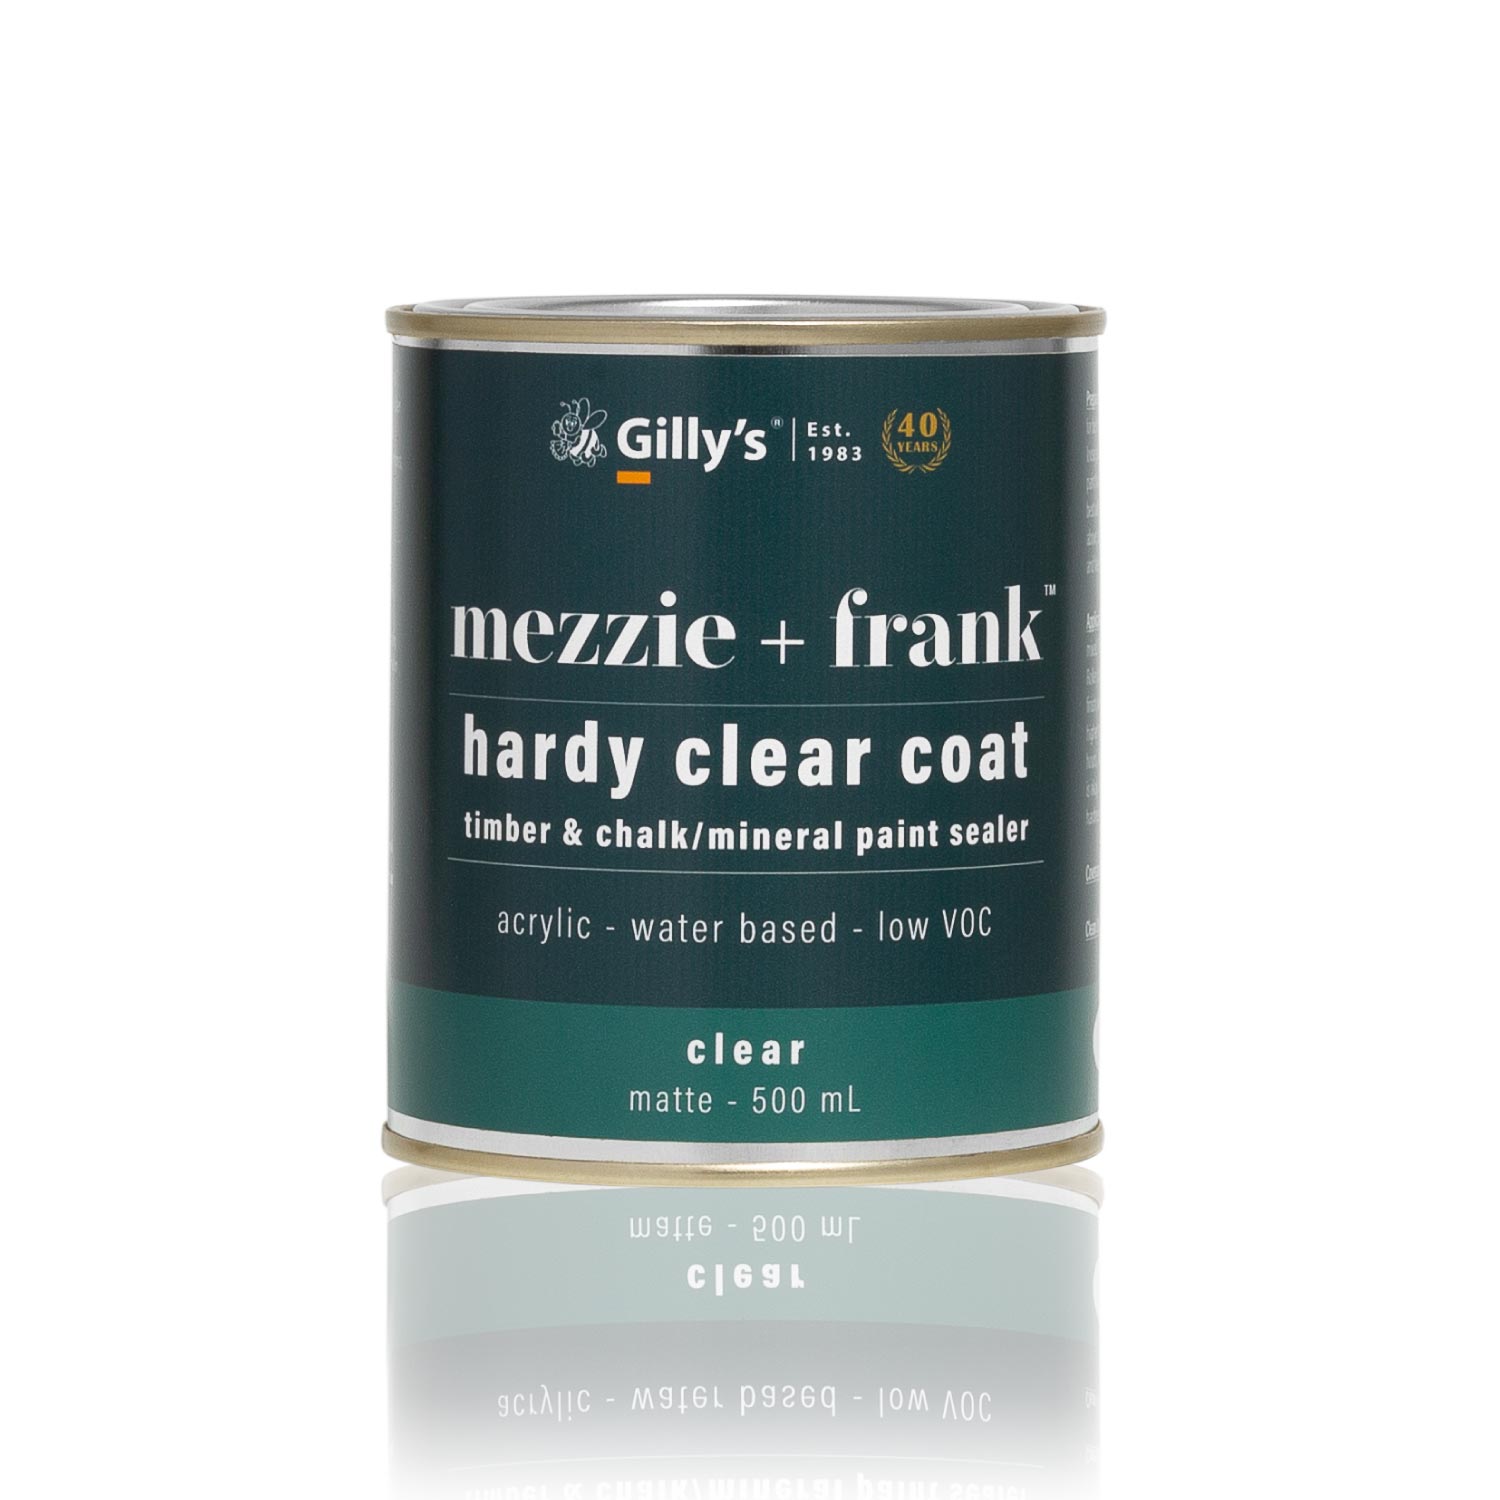 Mezzie + Frank Hardy Clear Coat Timber & Mineral / Chalk Paint Sealer by Gilly's